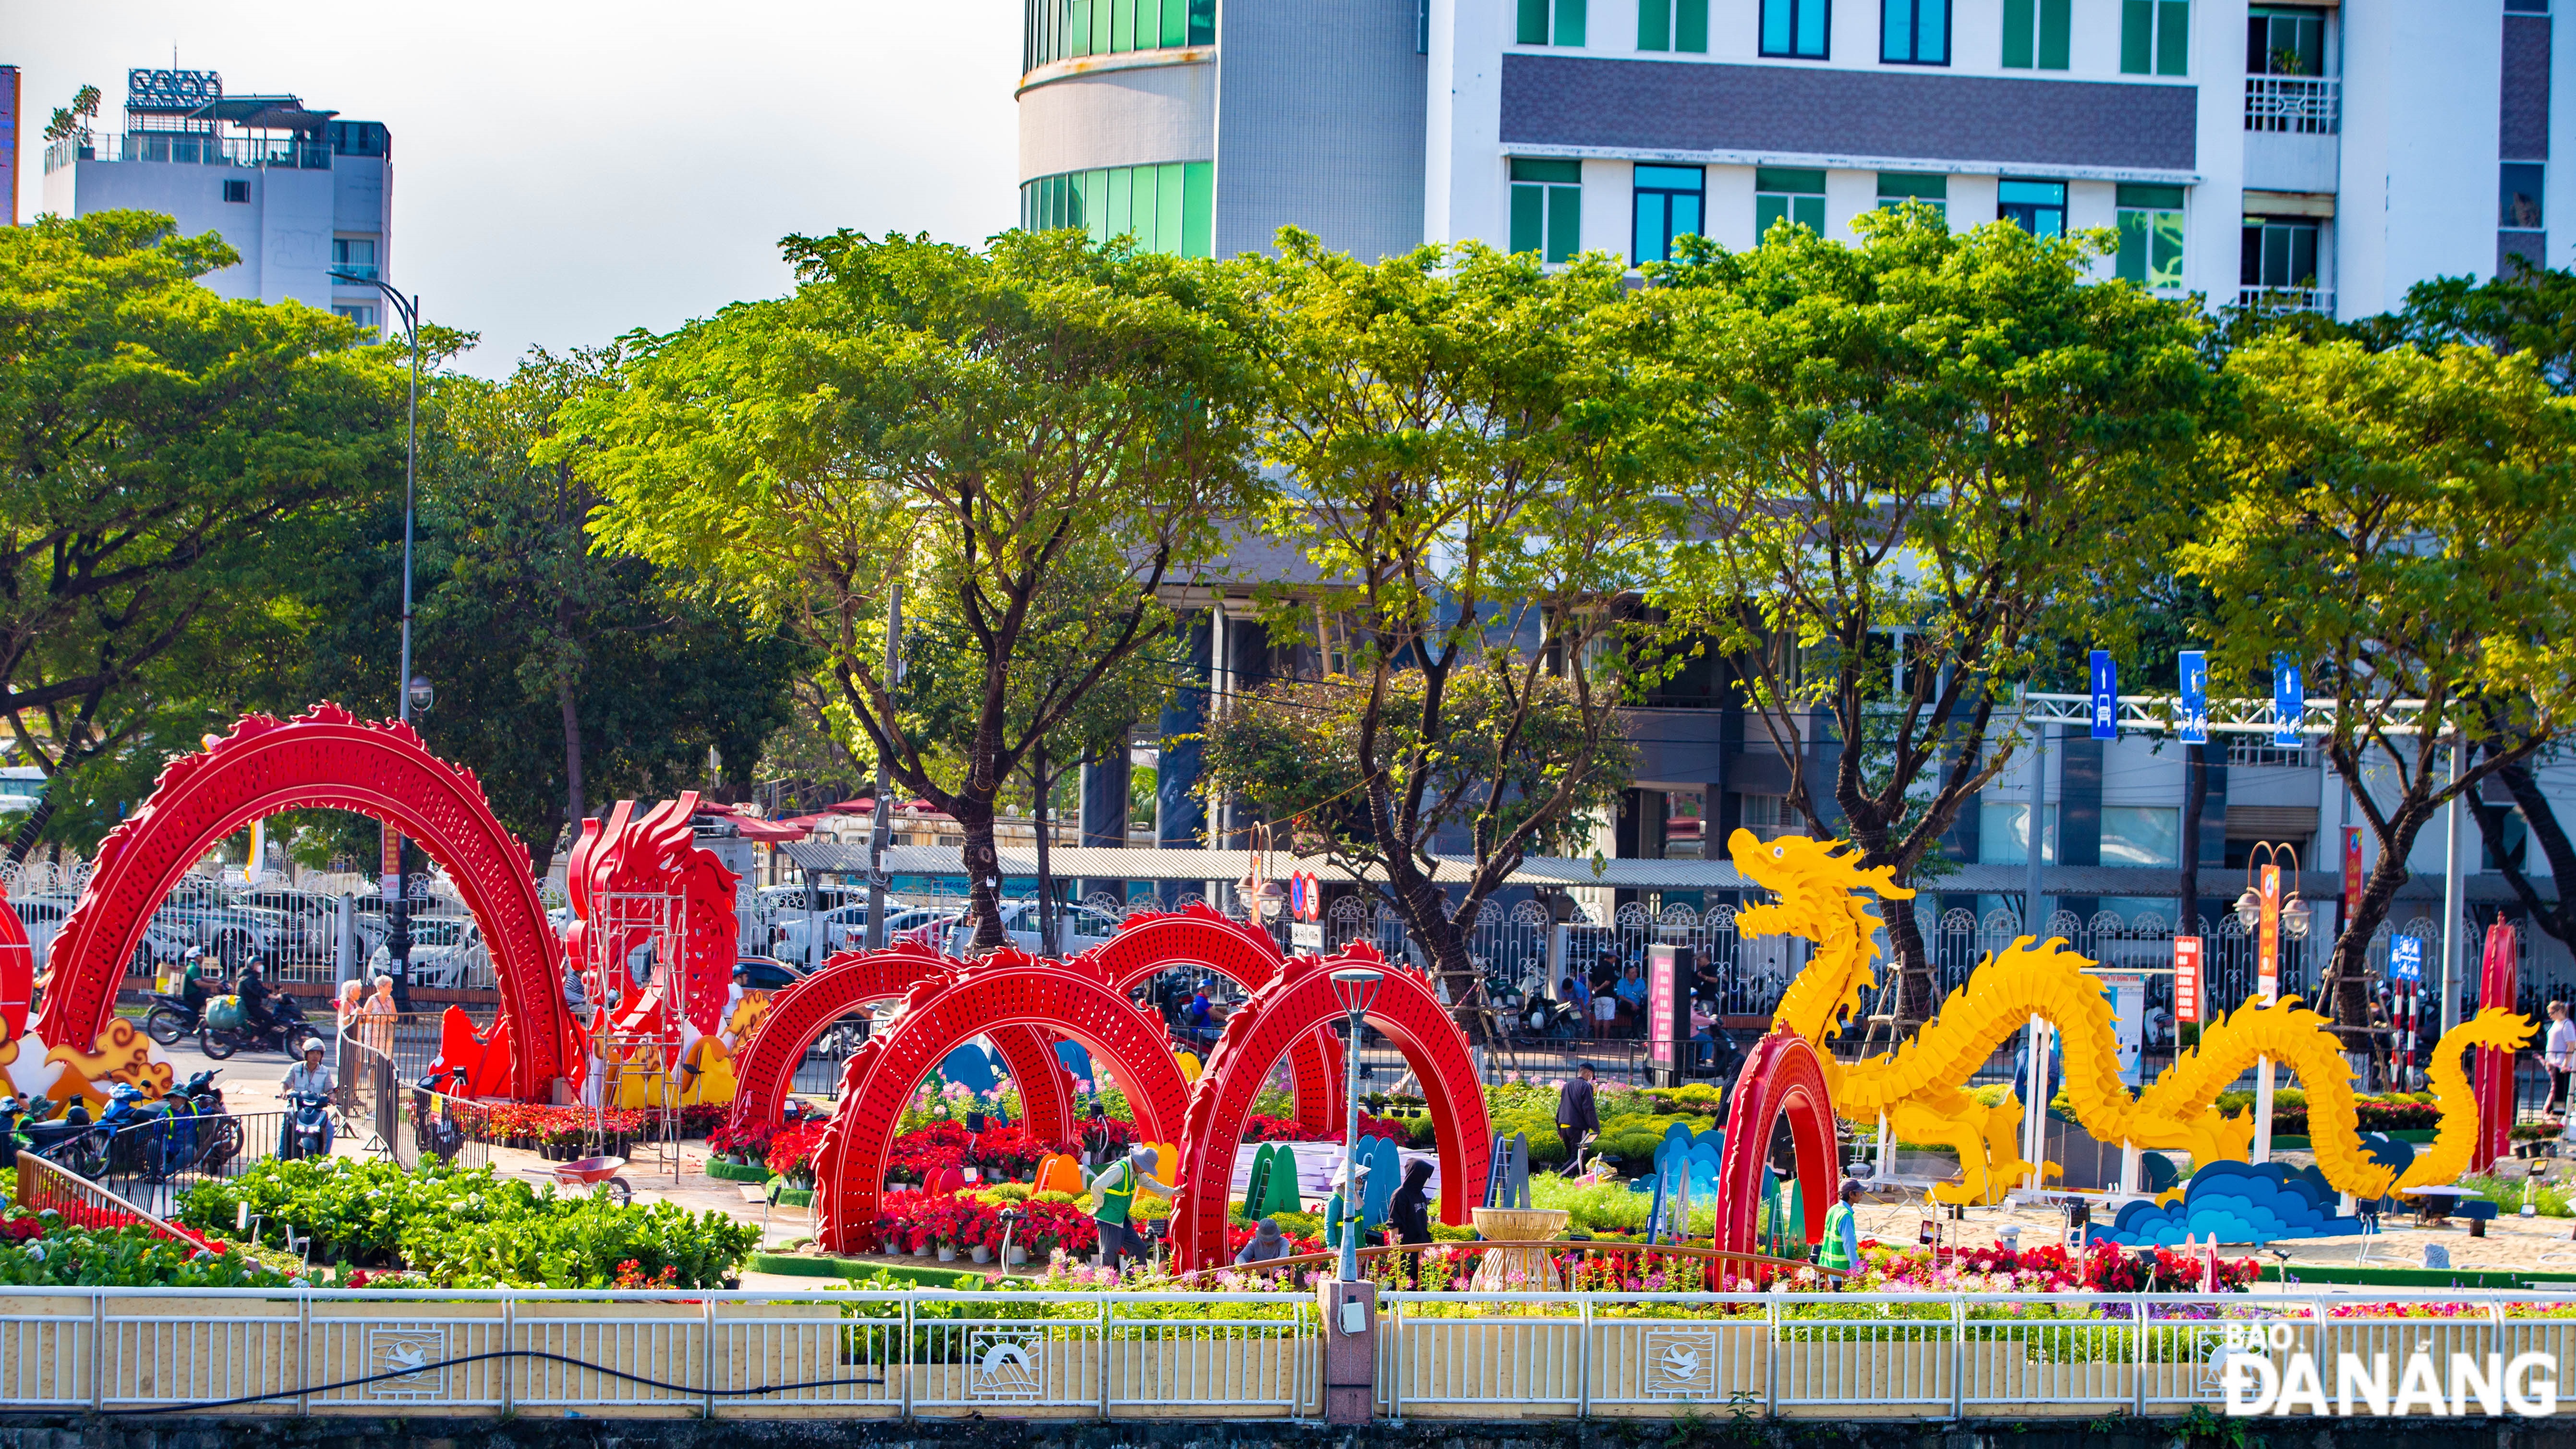 Many models of dragon are being displayed along Bach Dang Street 